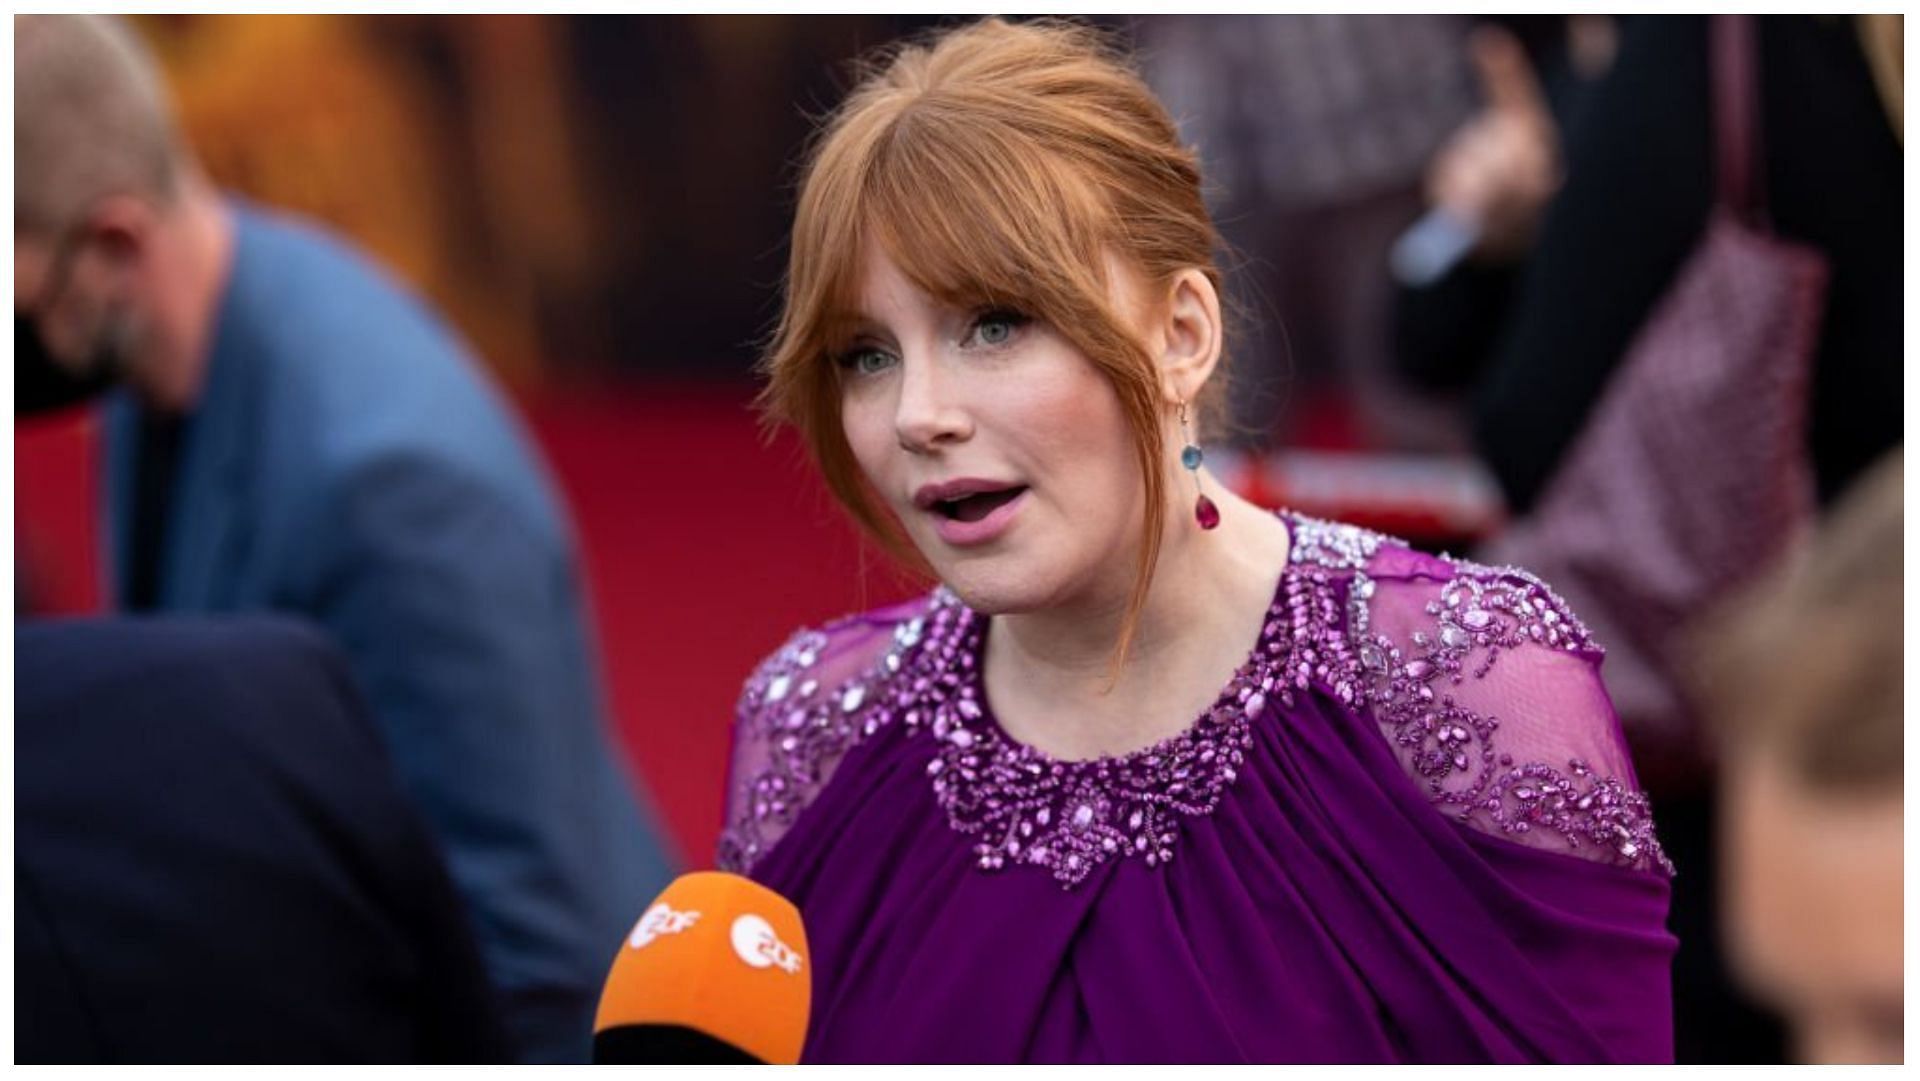 Bryce Dallas Howard has accumulated a lot of wealth from her work as an actor (Image via Joshua Sammer/Getty Images)